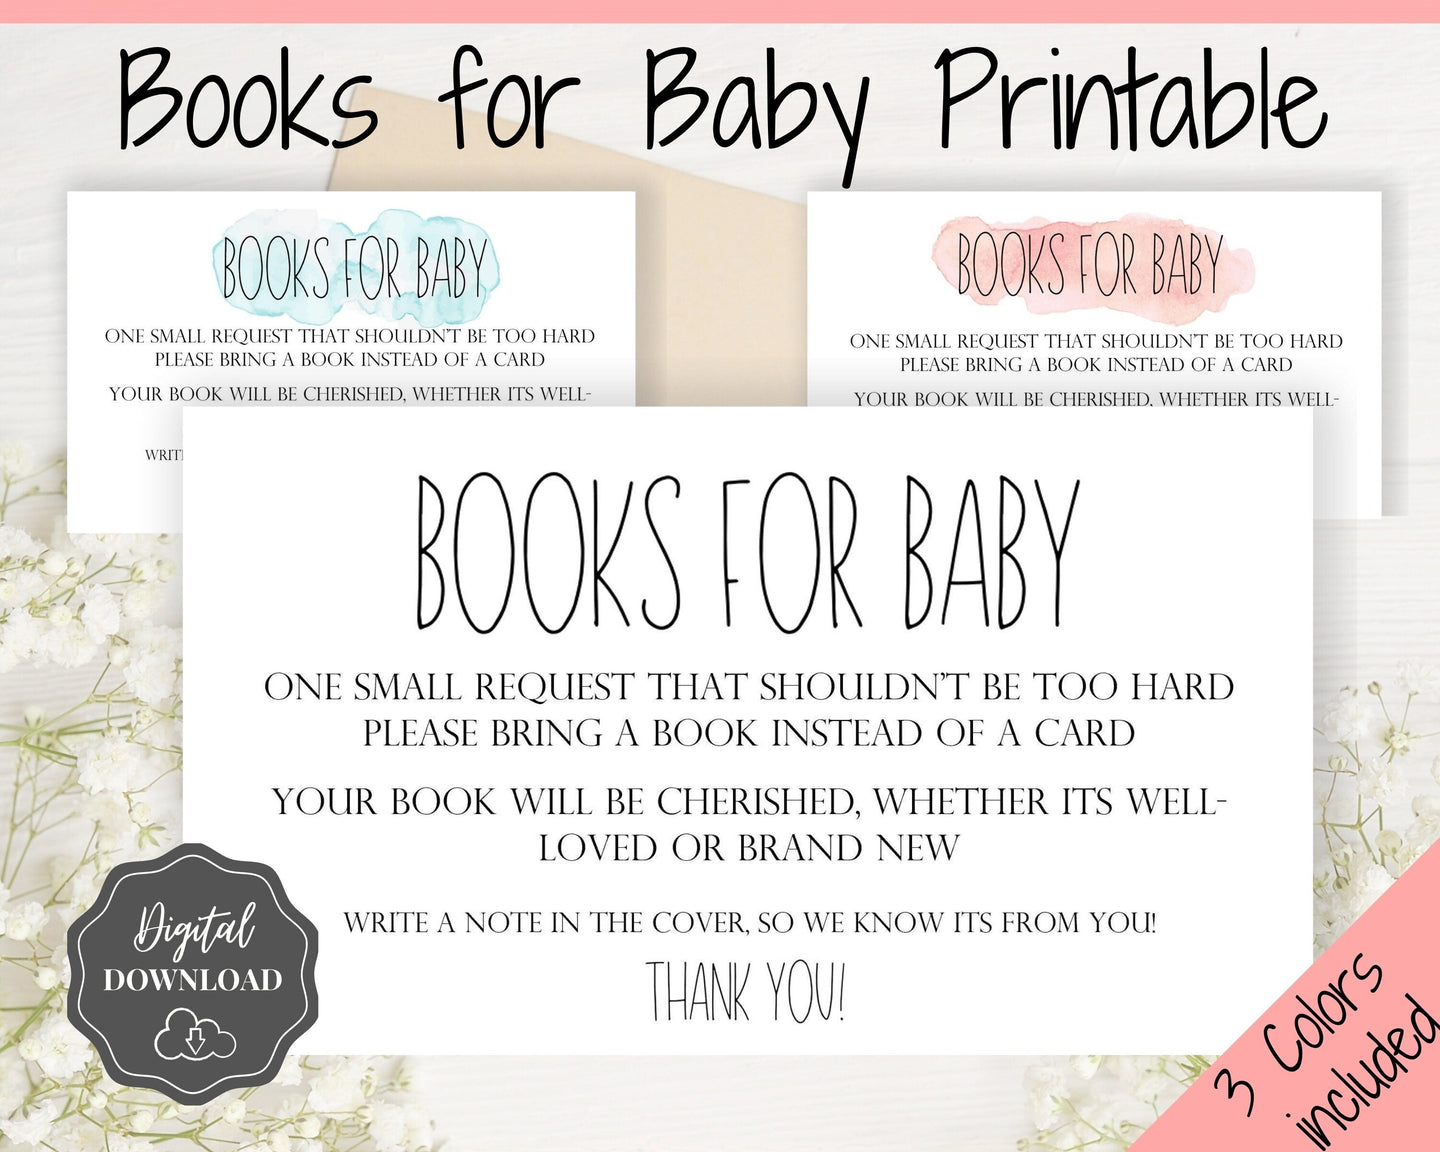 Books for Baby Card, Printable Book Request Card, Book Request Baby Shower, Baby Shower Ideas, Bring a Book Insert, Games, Favors, Pink Blue